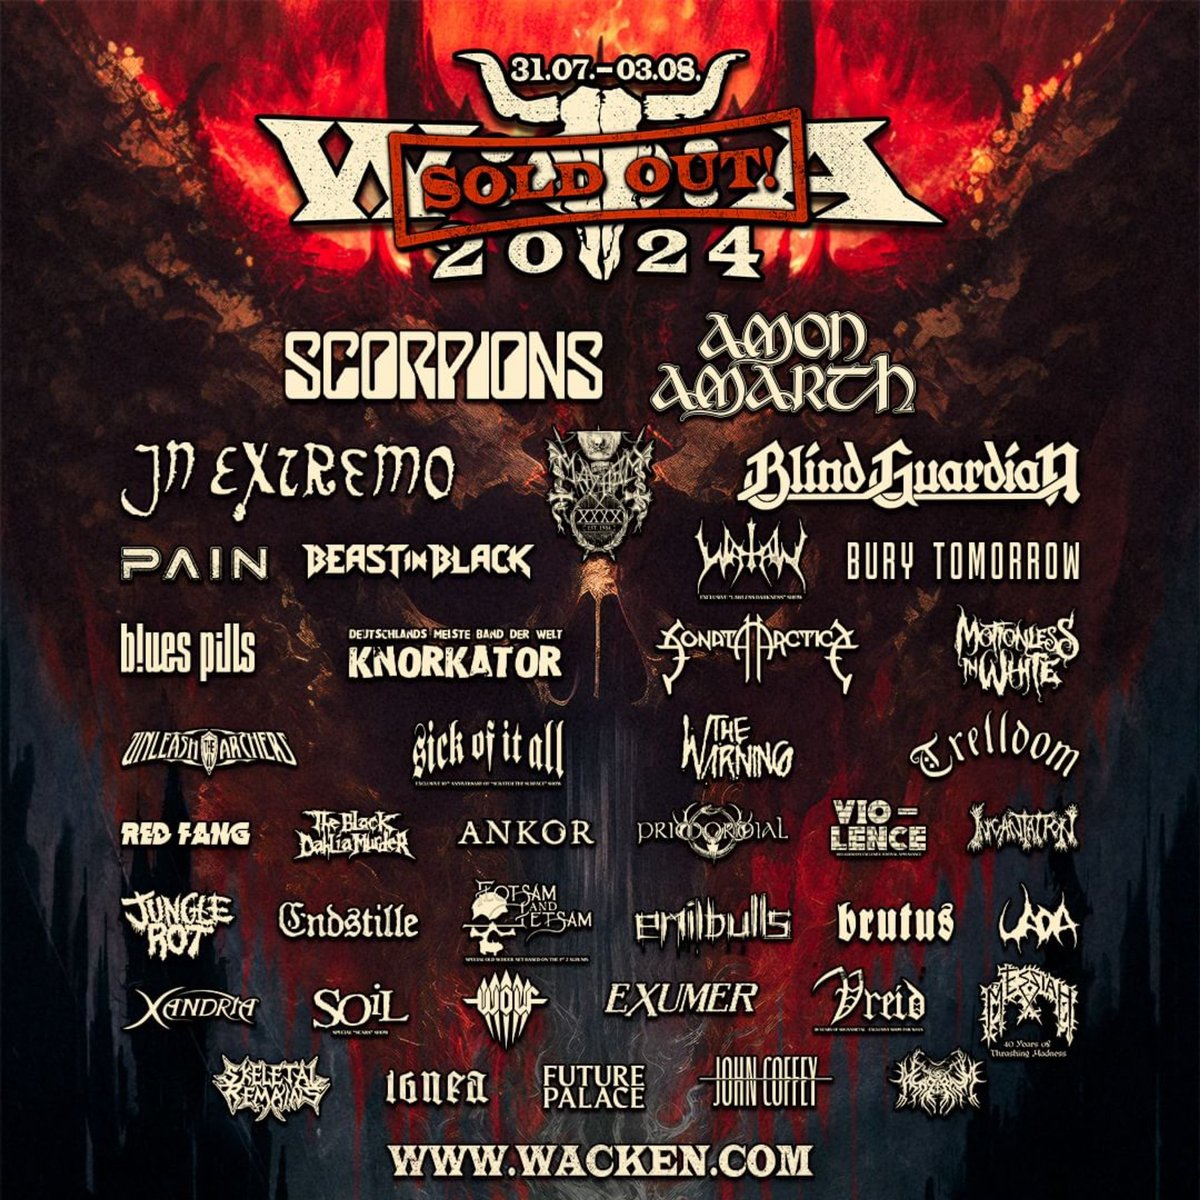 Stoked to announce that we will be playing @Wacken next summer. This will be a part of our European UNHOLY DEIFICATION tour. Tickets are already sold out, thanks for the support!